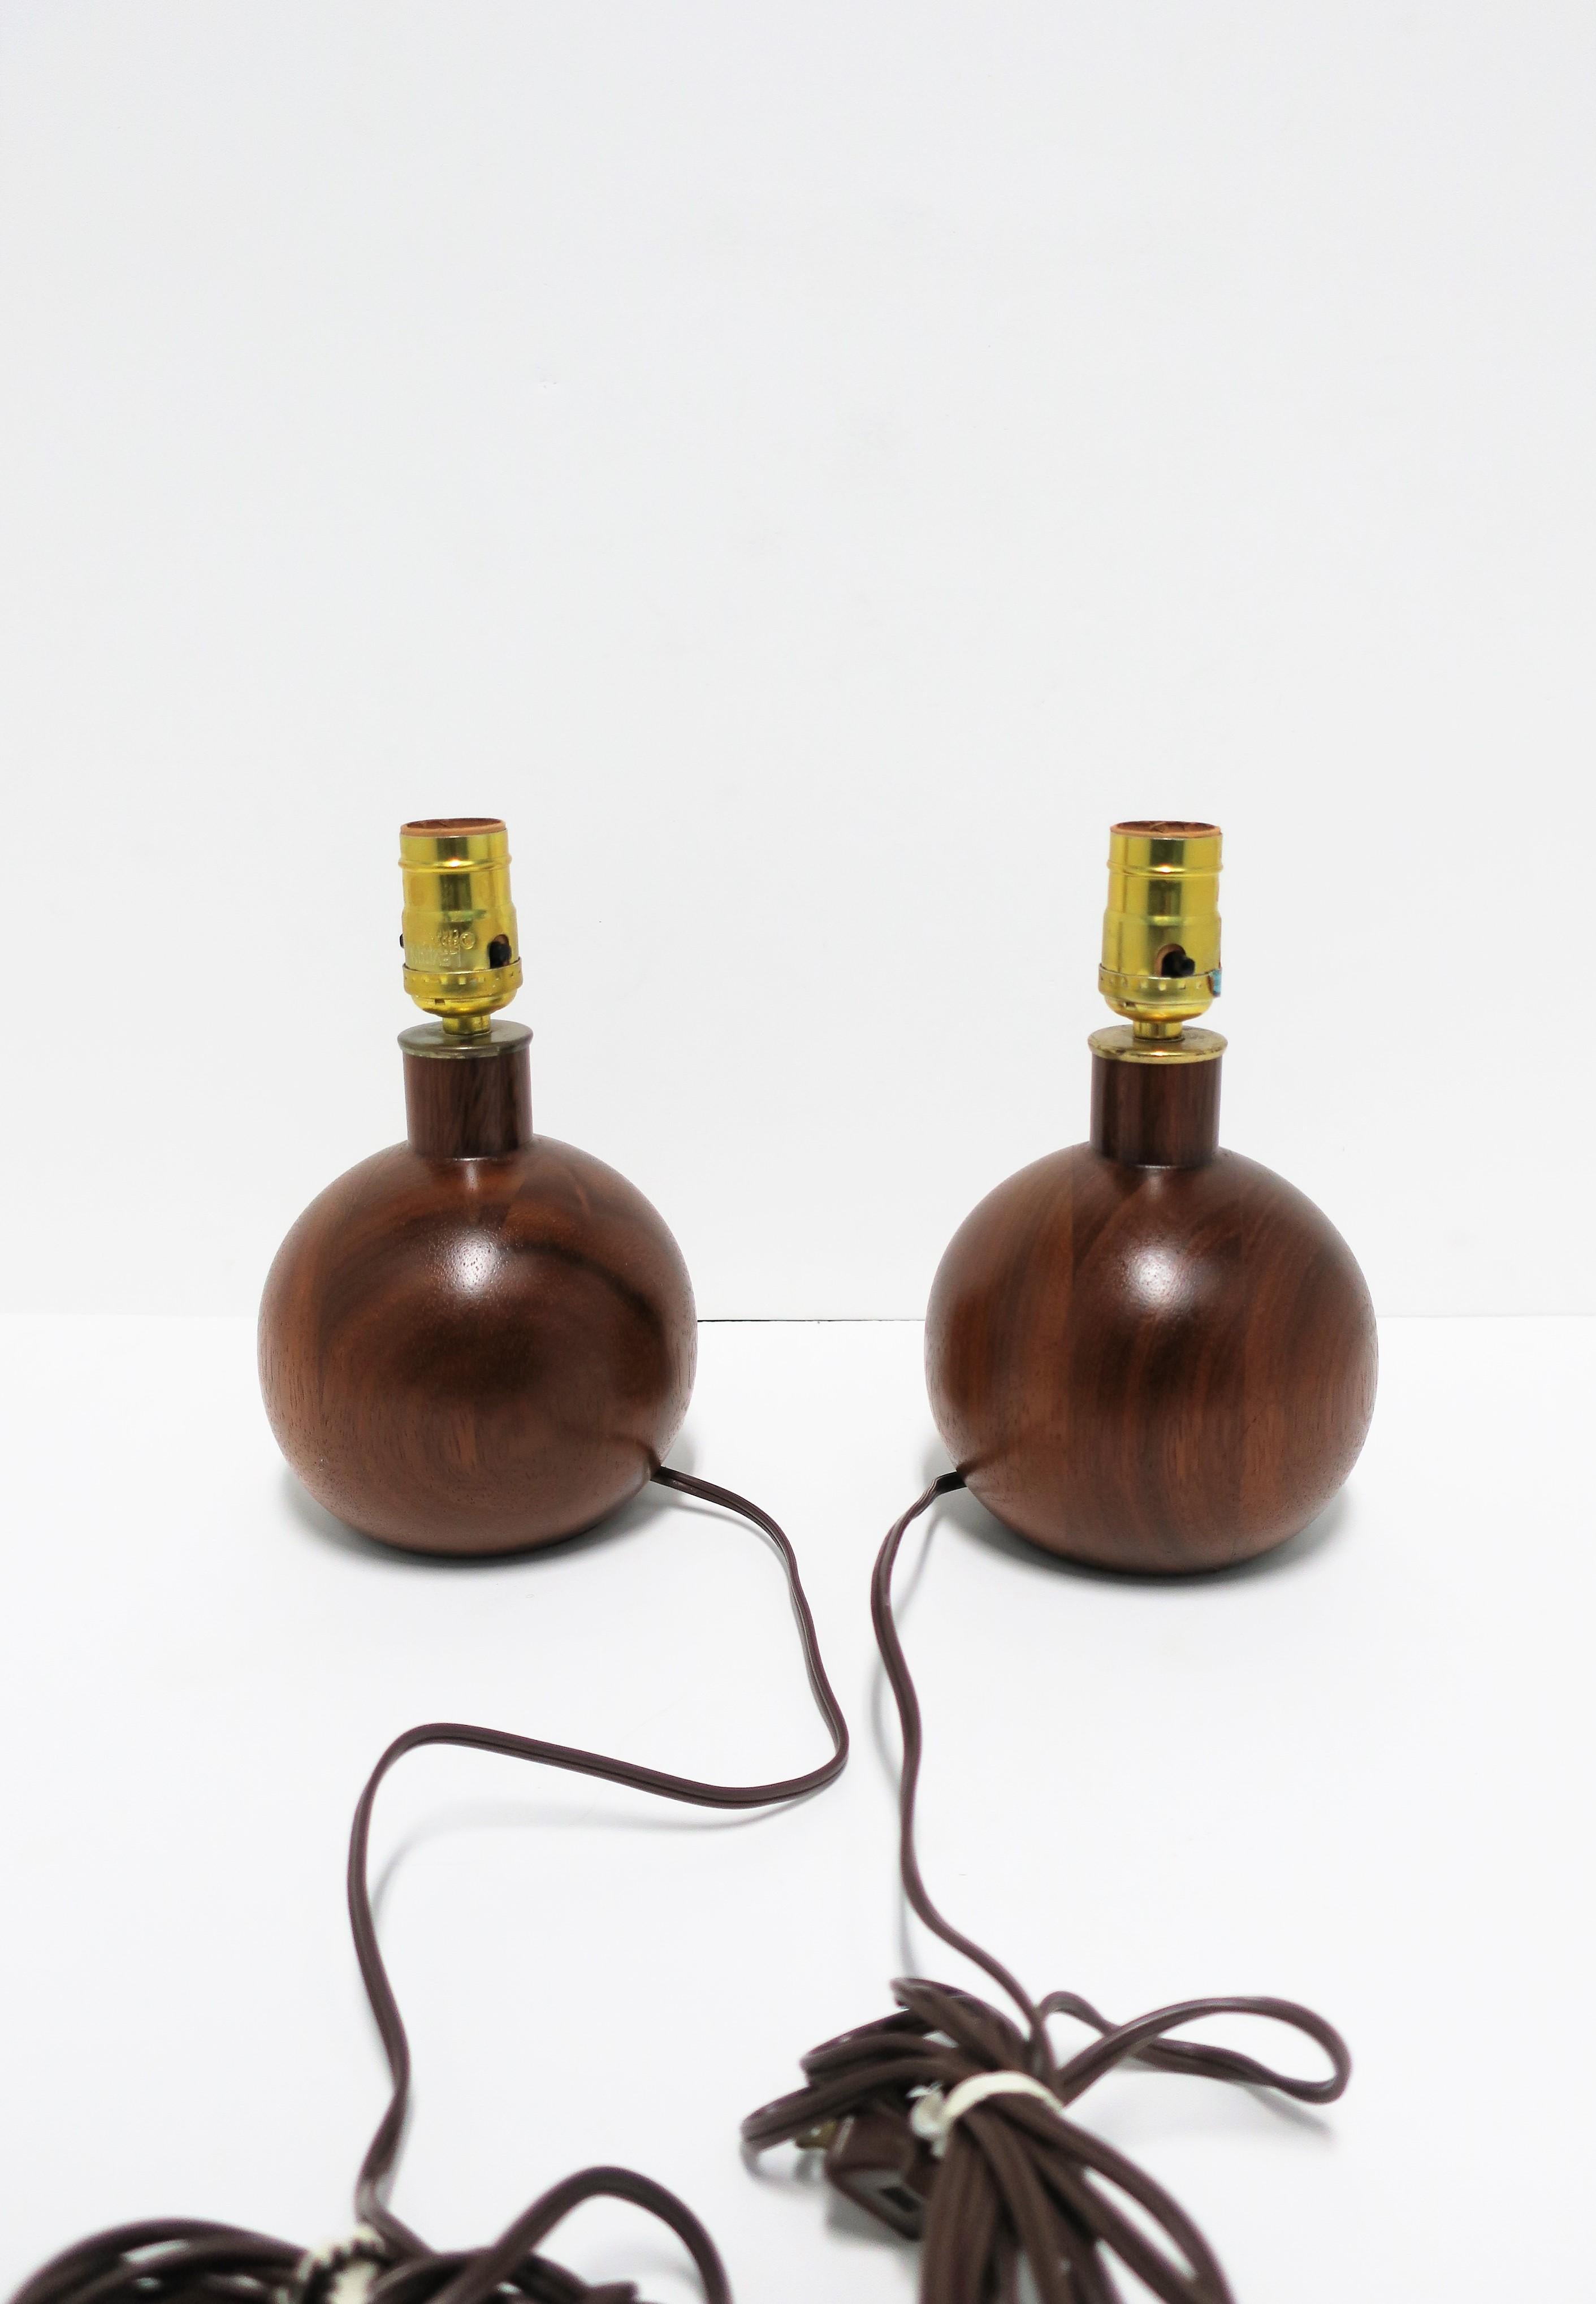 Modern Wood and Brass Round Ball Sphere Desk or Table Lamps 9